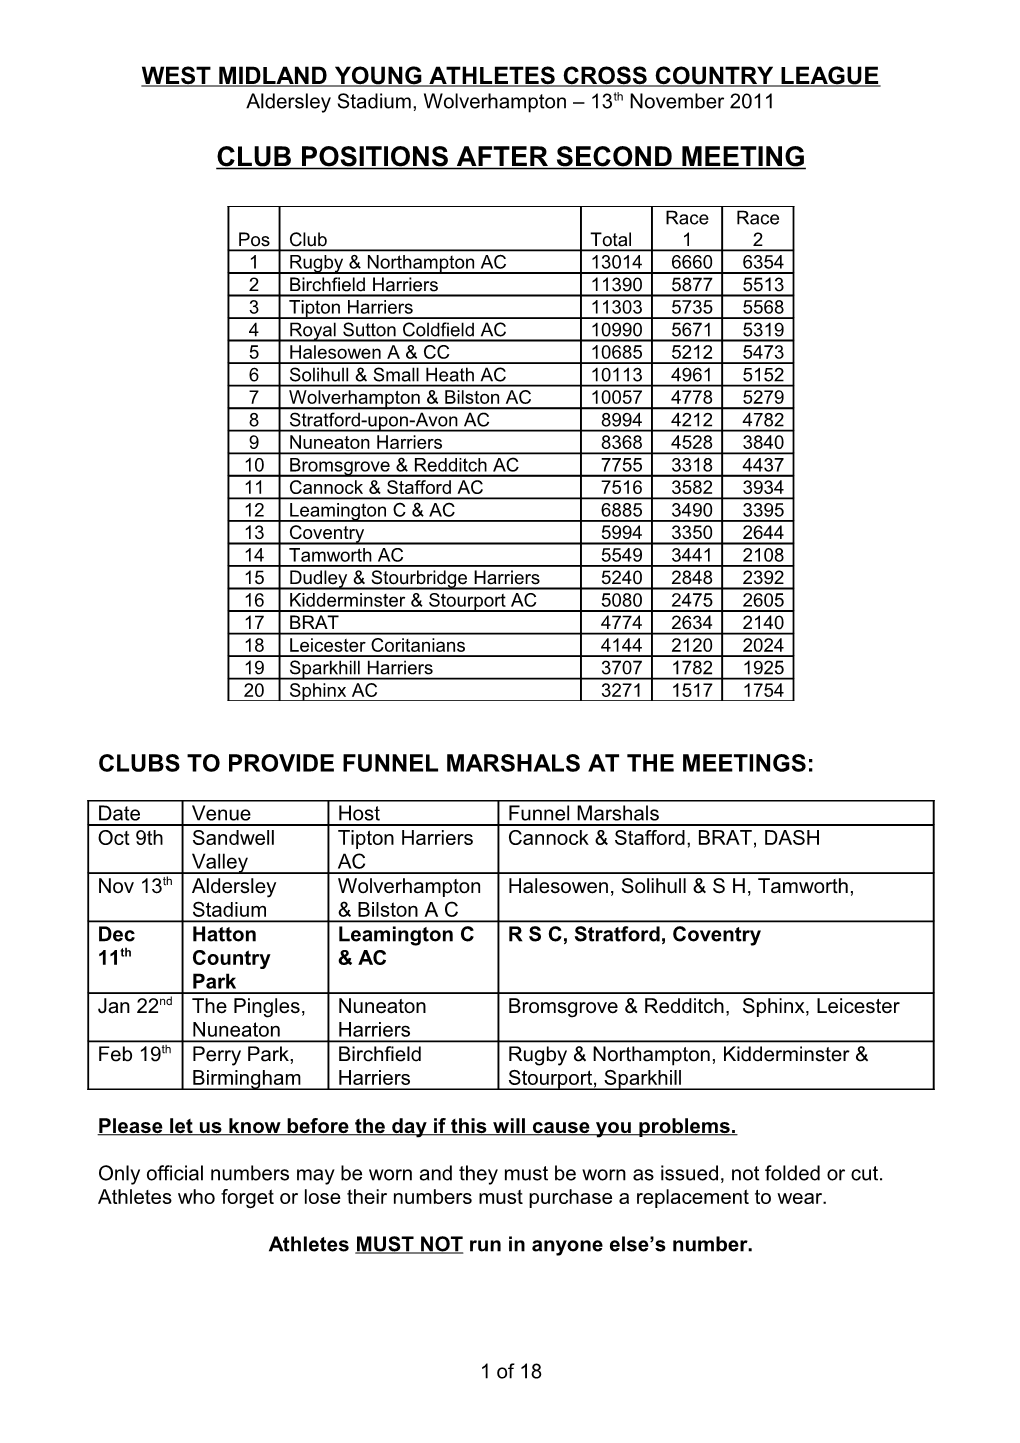 Club Positions After First Meeting